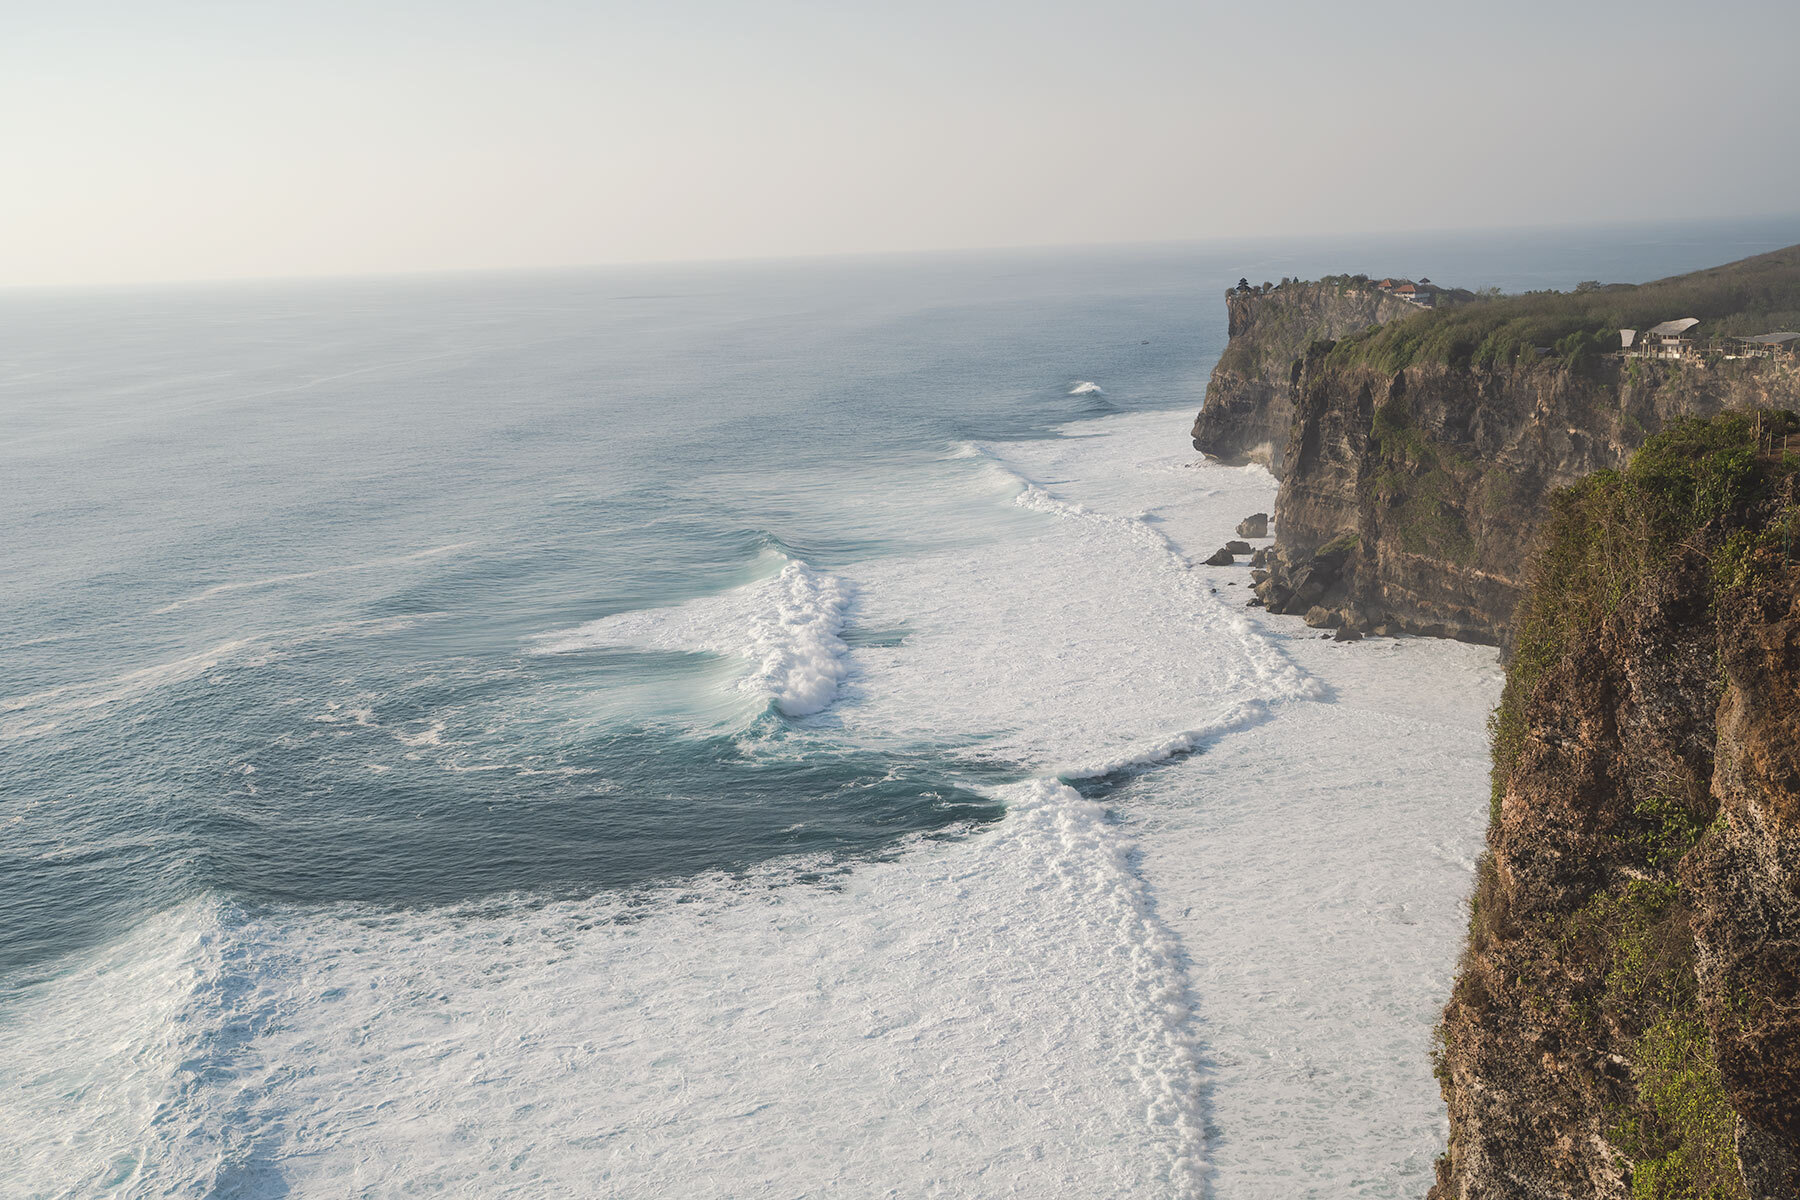 The outlook from Karang Boma Cliff in Uluwatu